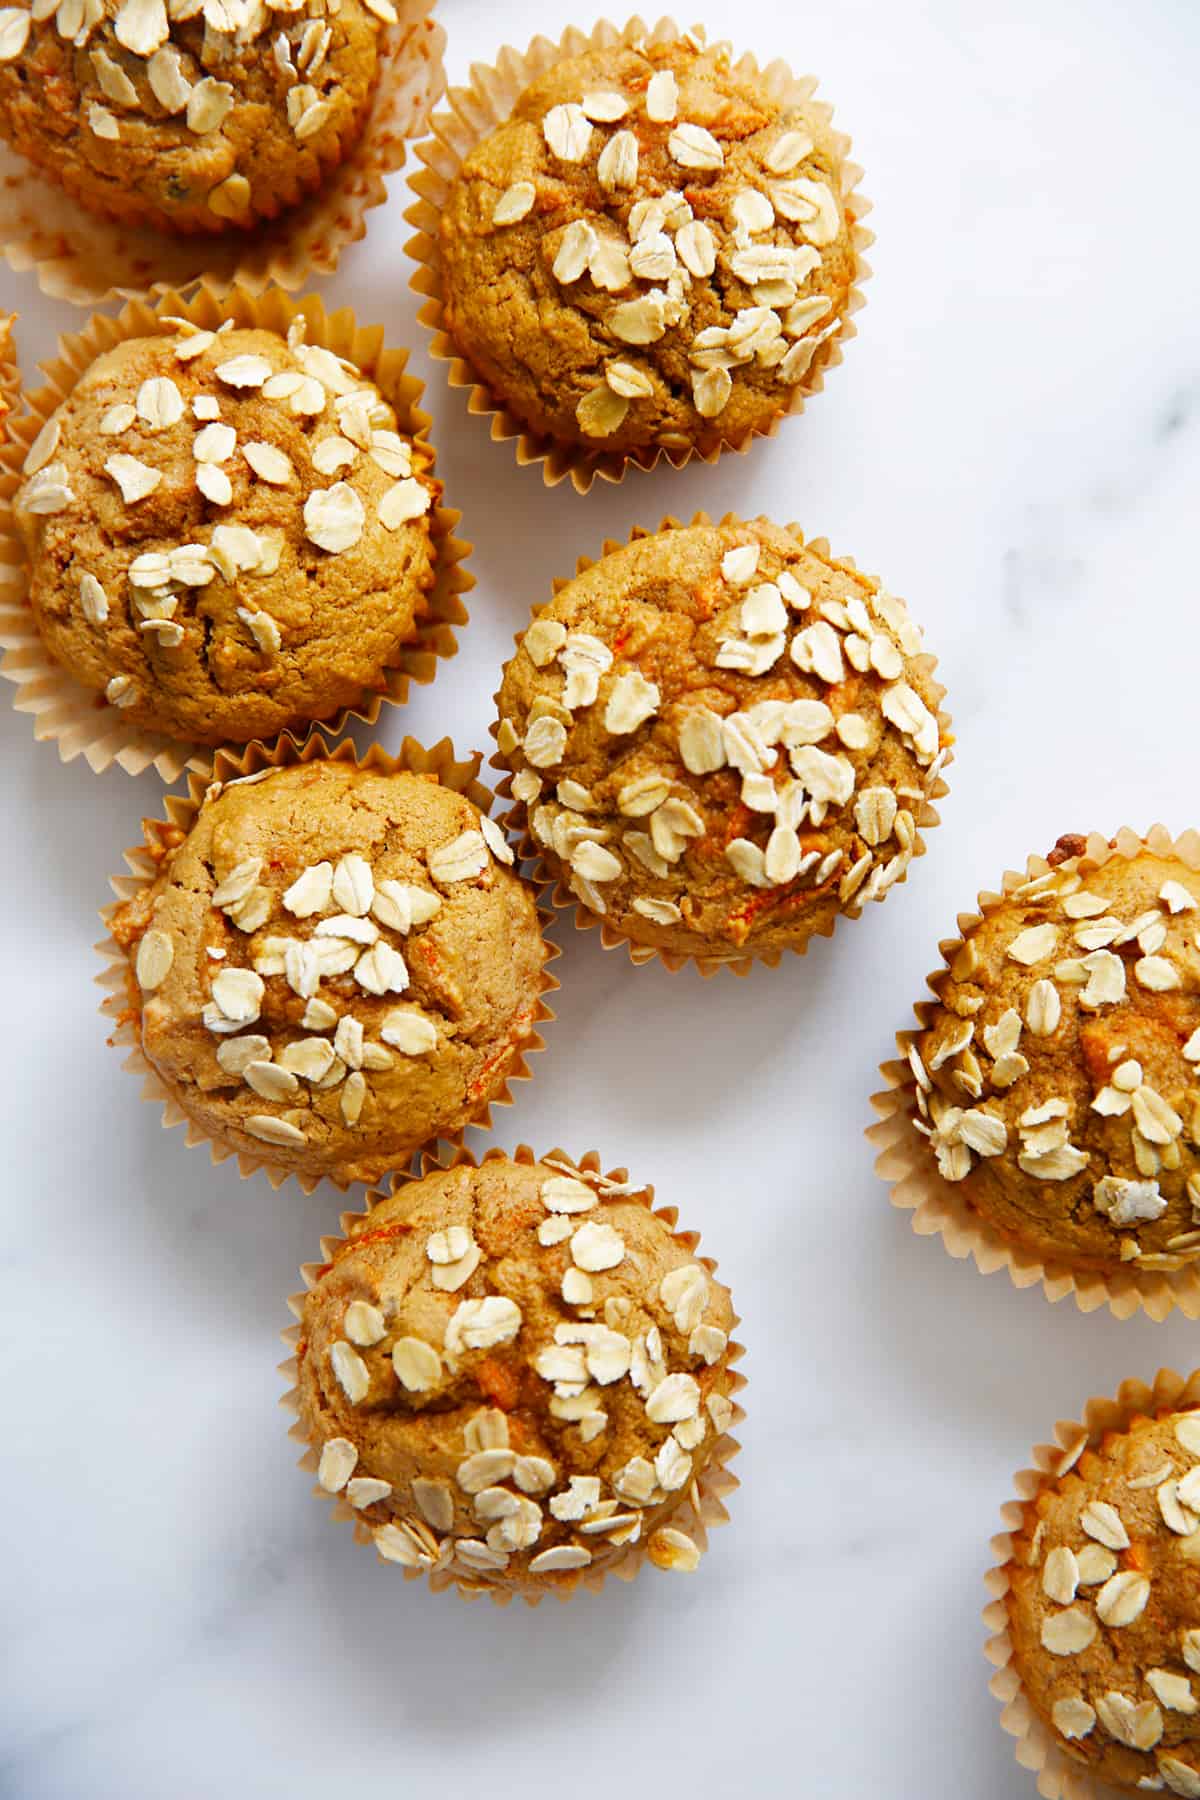 Healthy Carrot Muffins (Gluten-Free and Nut-Free)